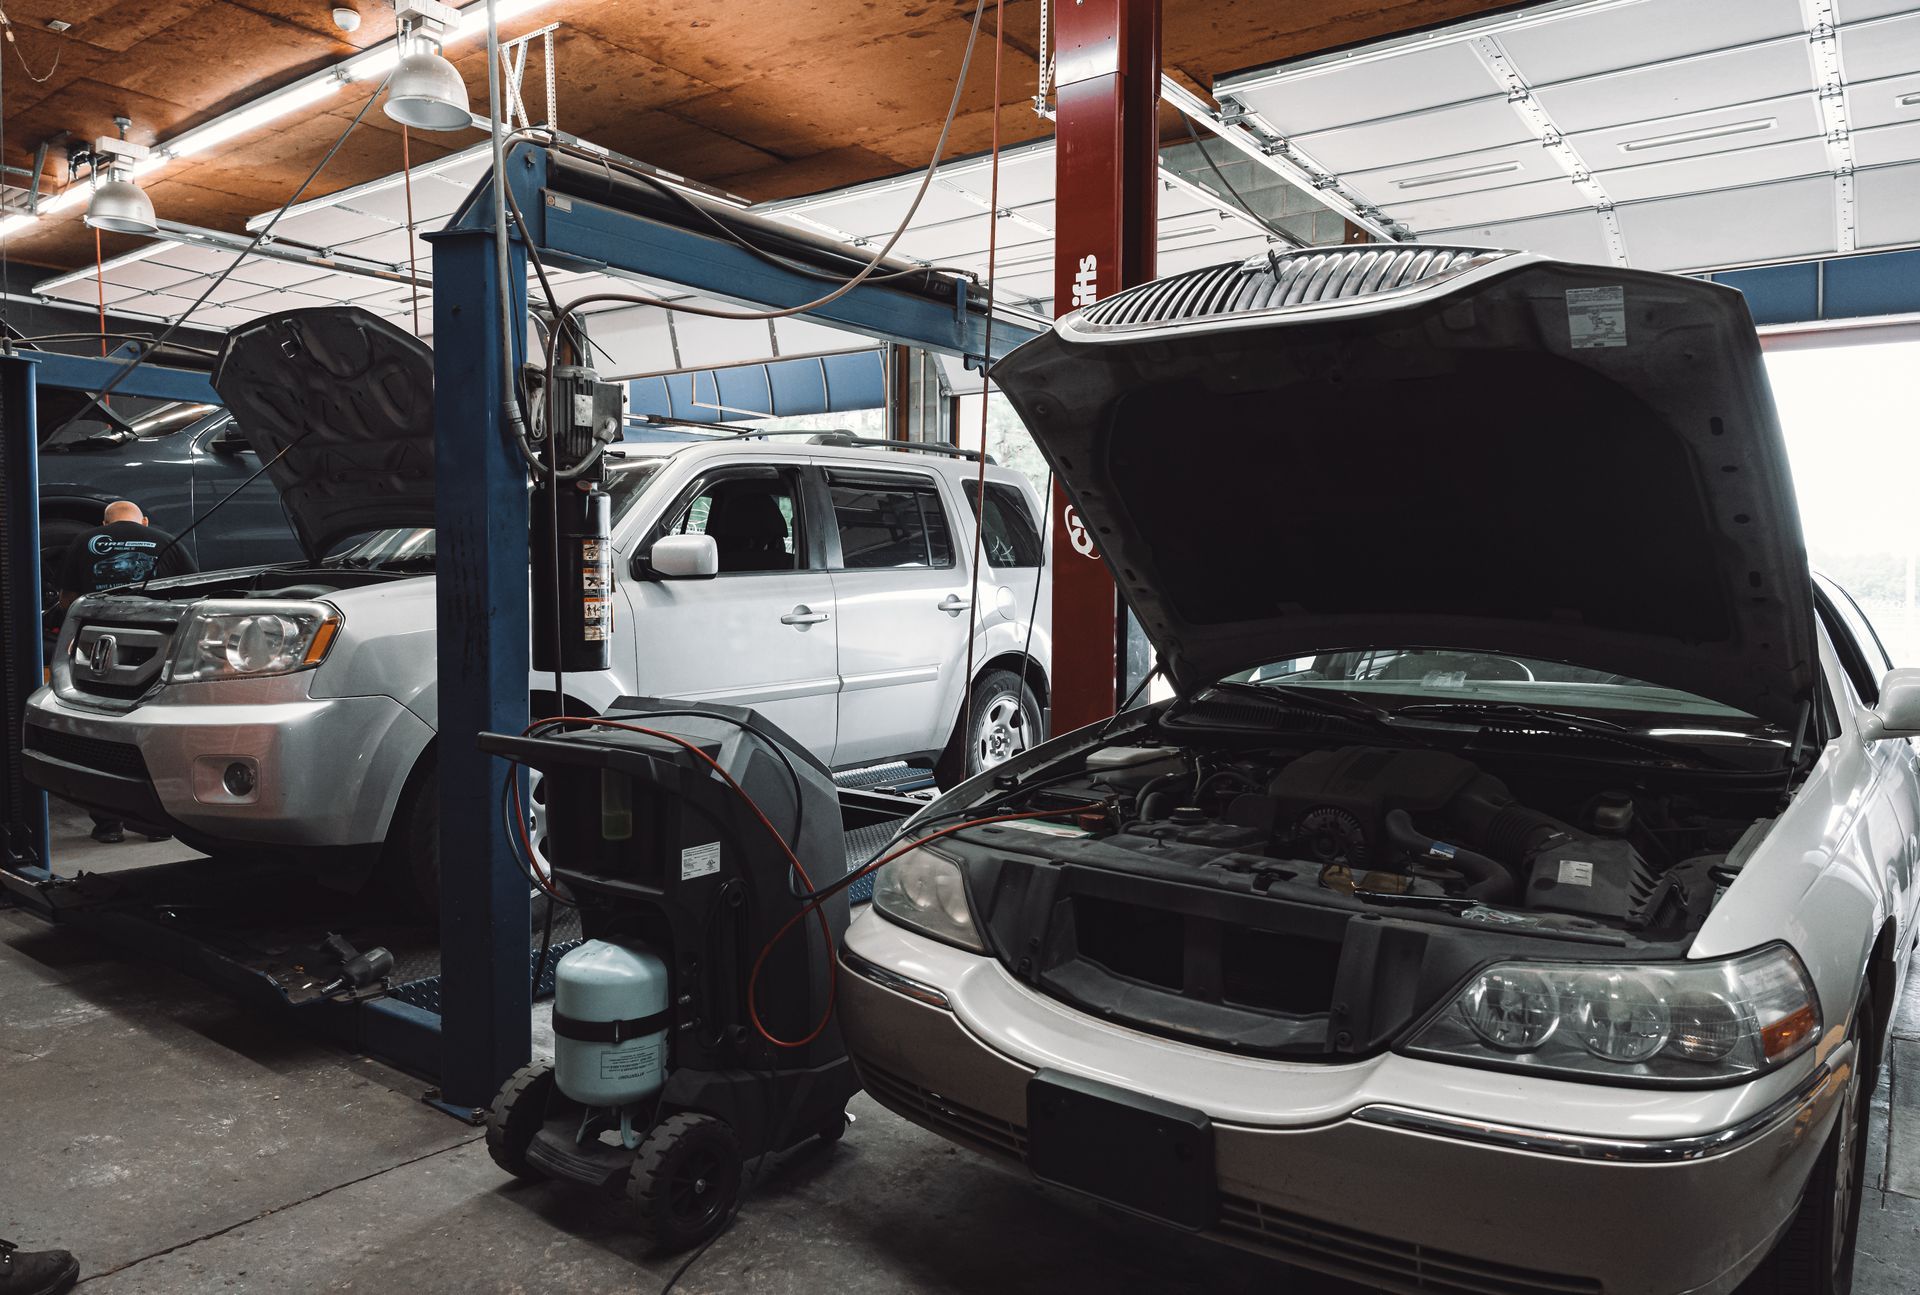 Auto maintenance at Tire Country in Pageland, SC